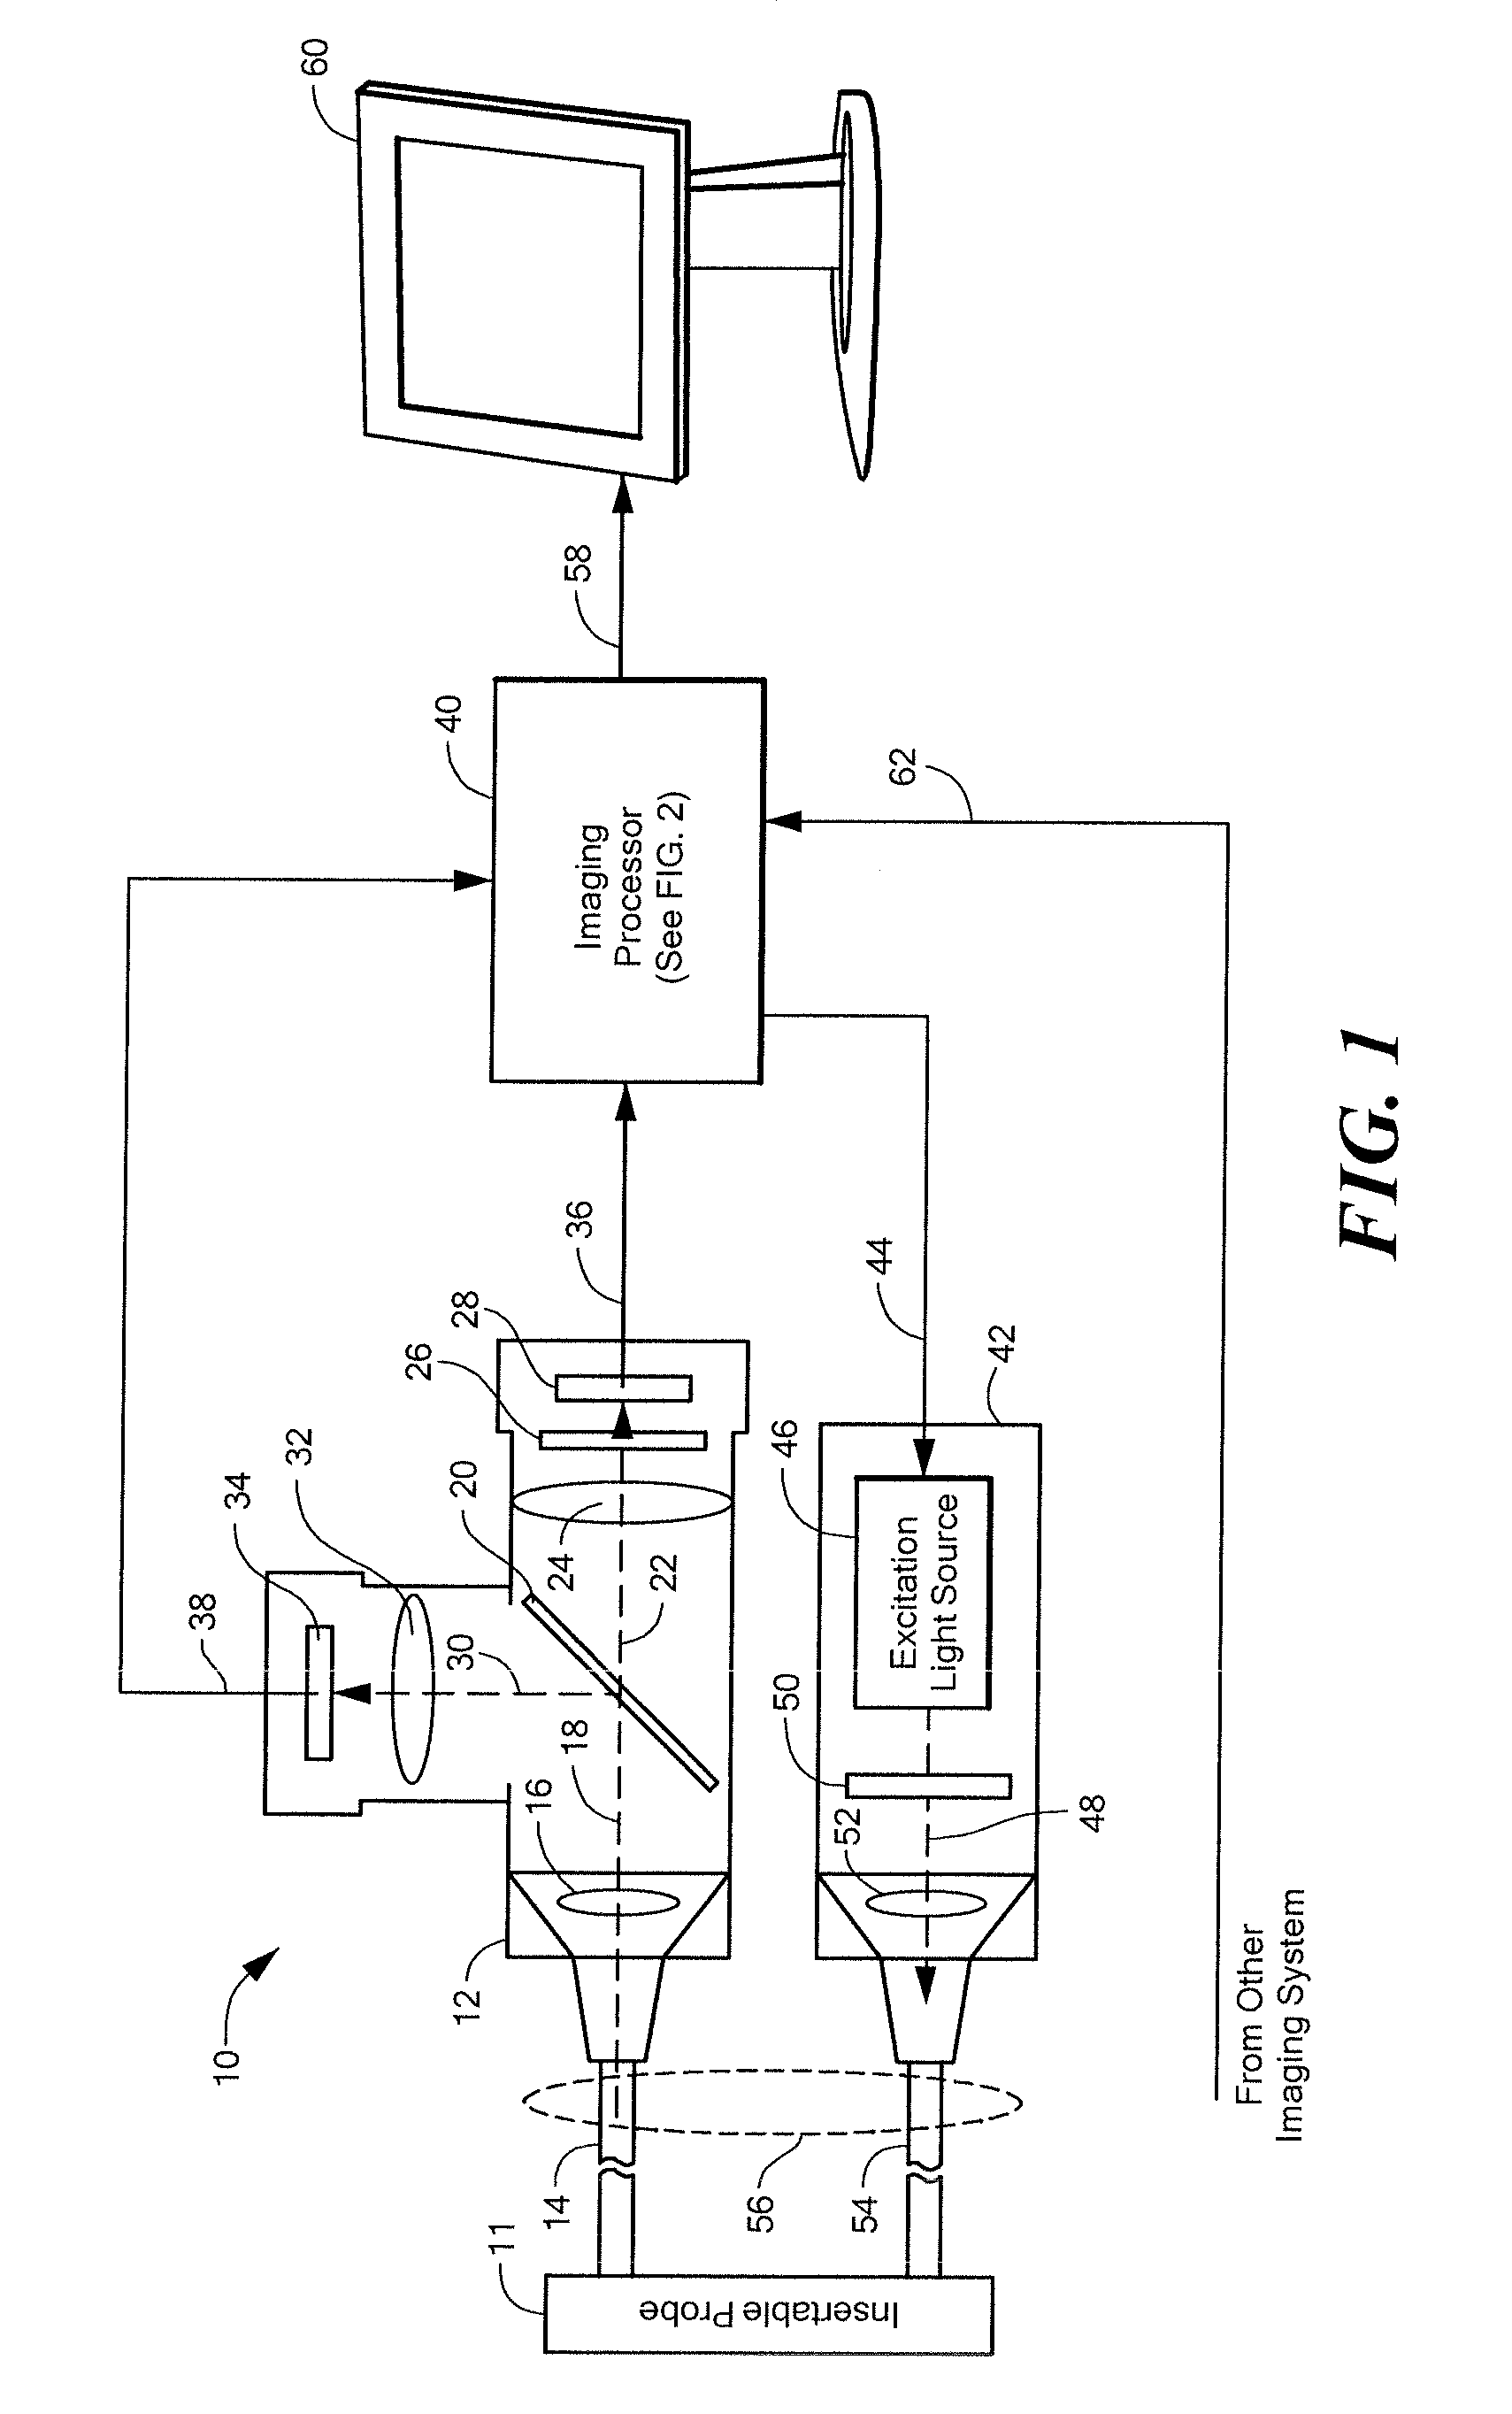 Systems and methods for generating fluorescent light images